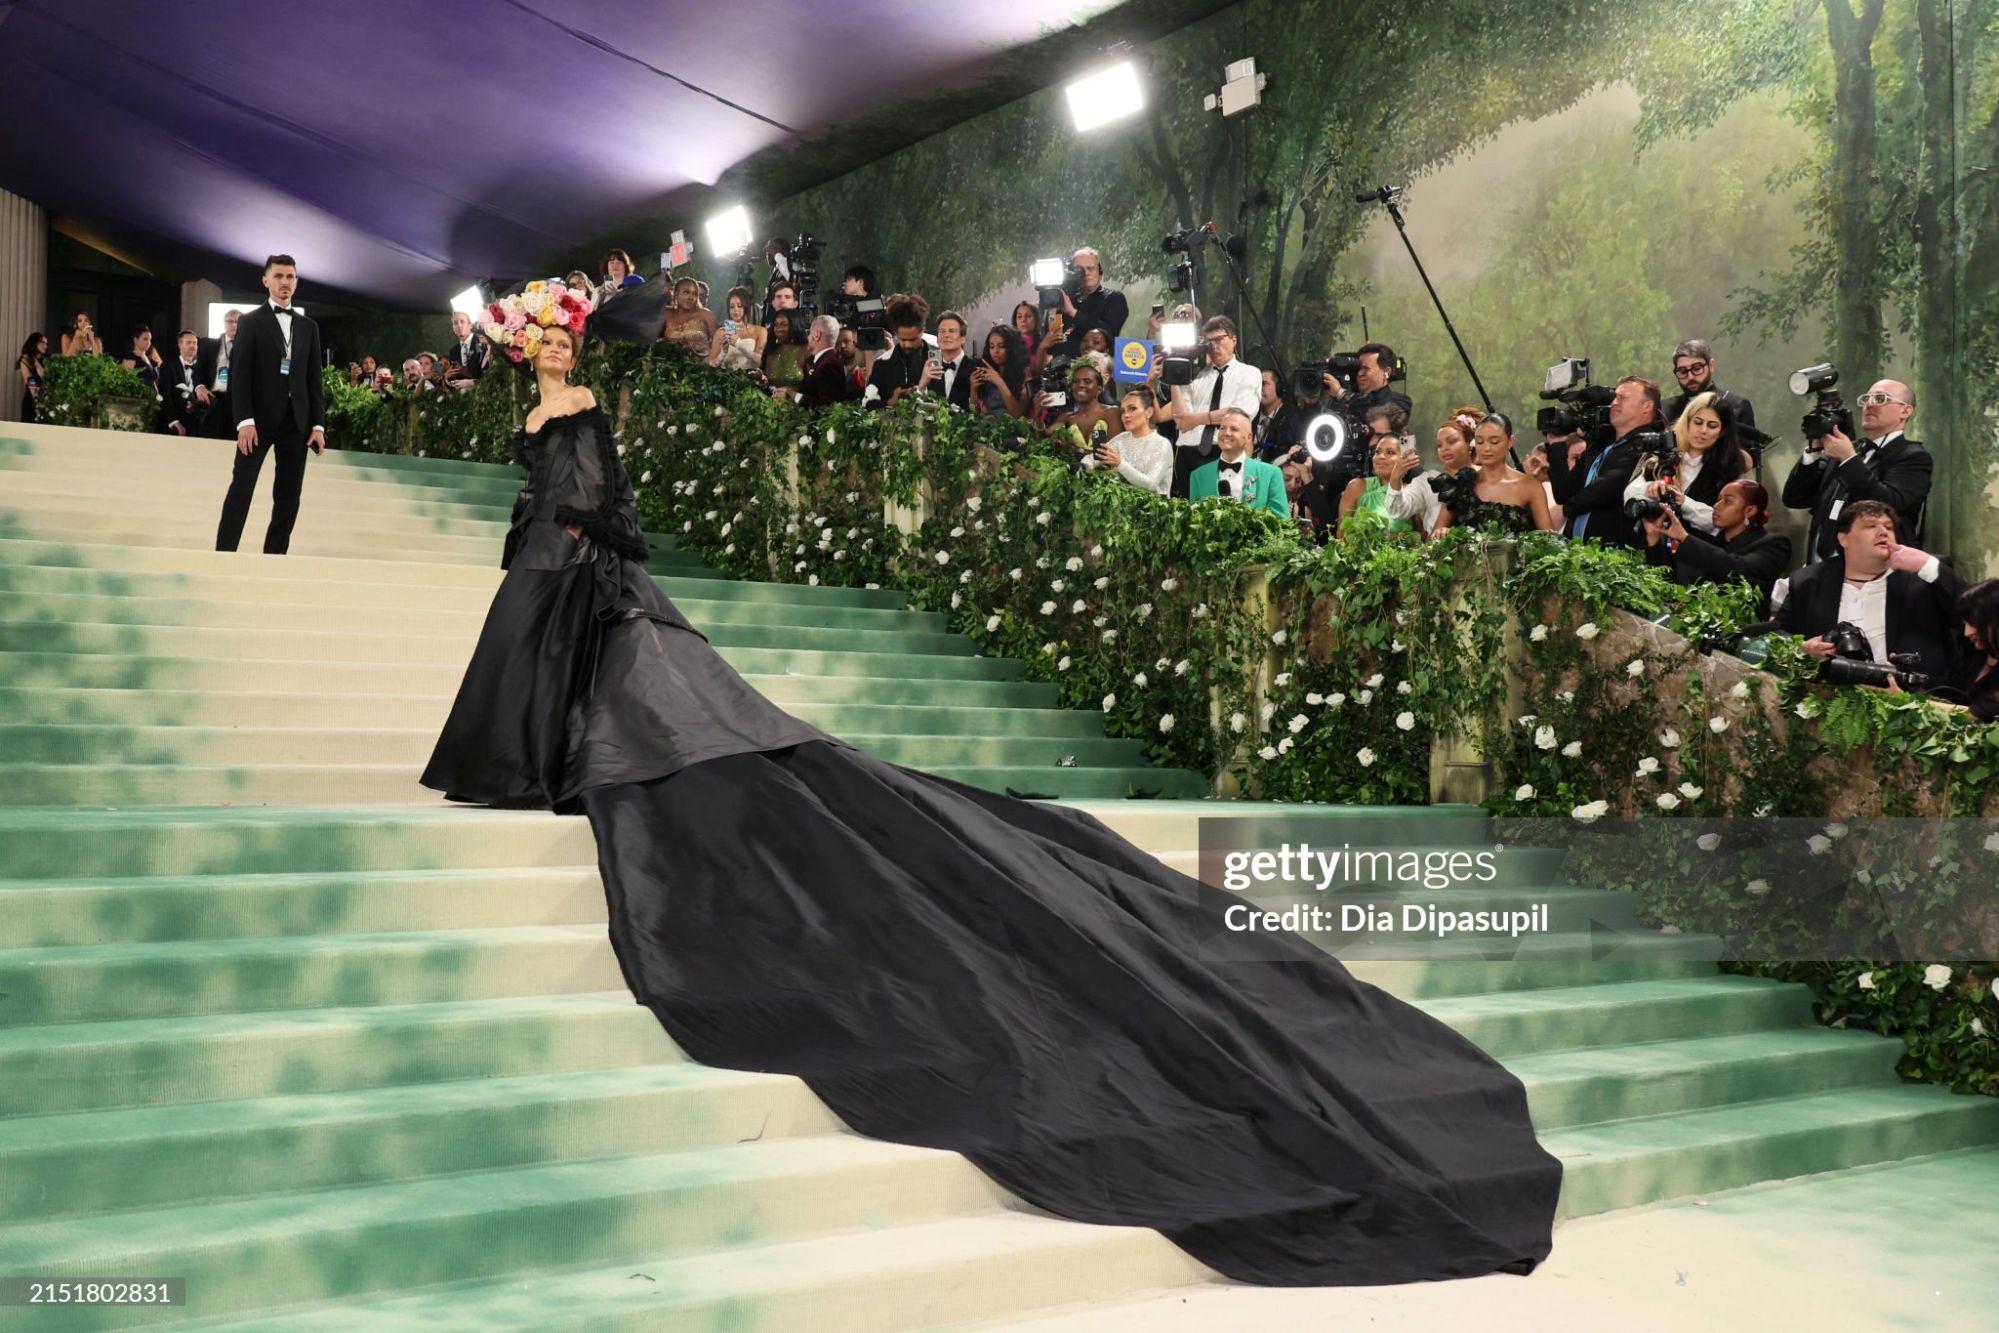 gettyimages-2151802831-2048x2048.jpg